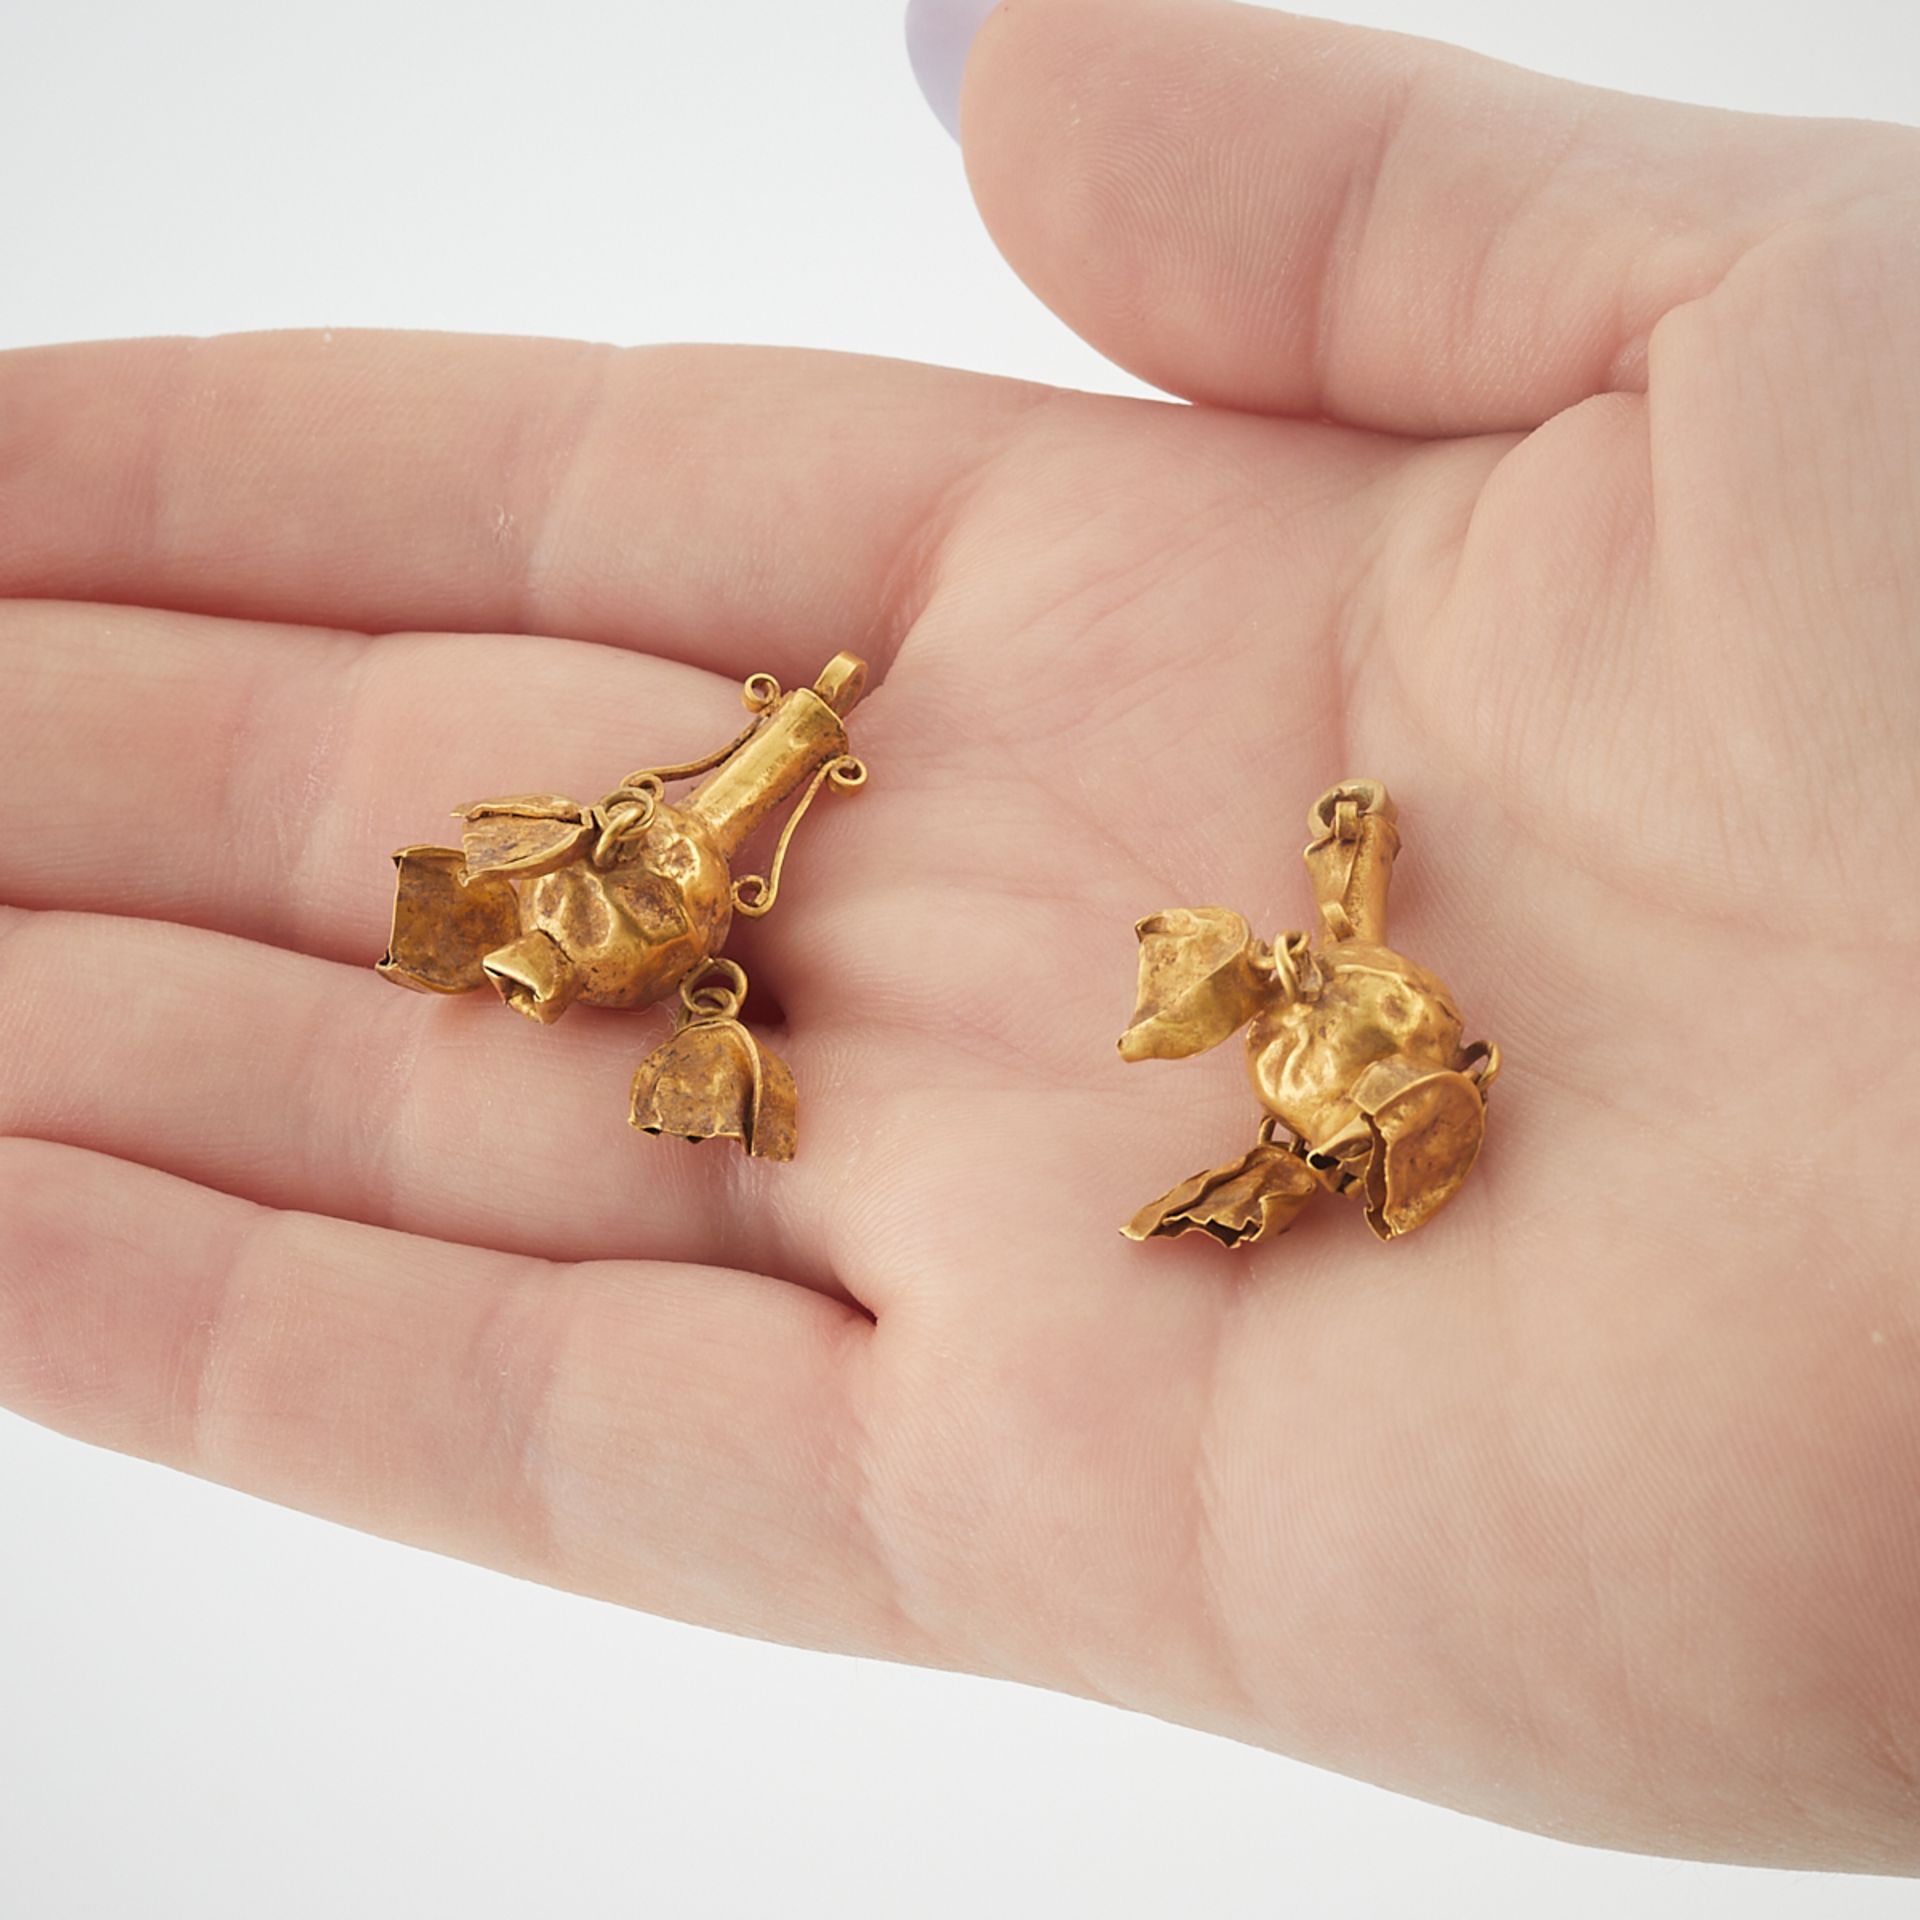 Ancient Parthian Gold Earrings - Image 2 of 5